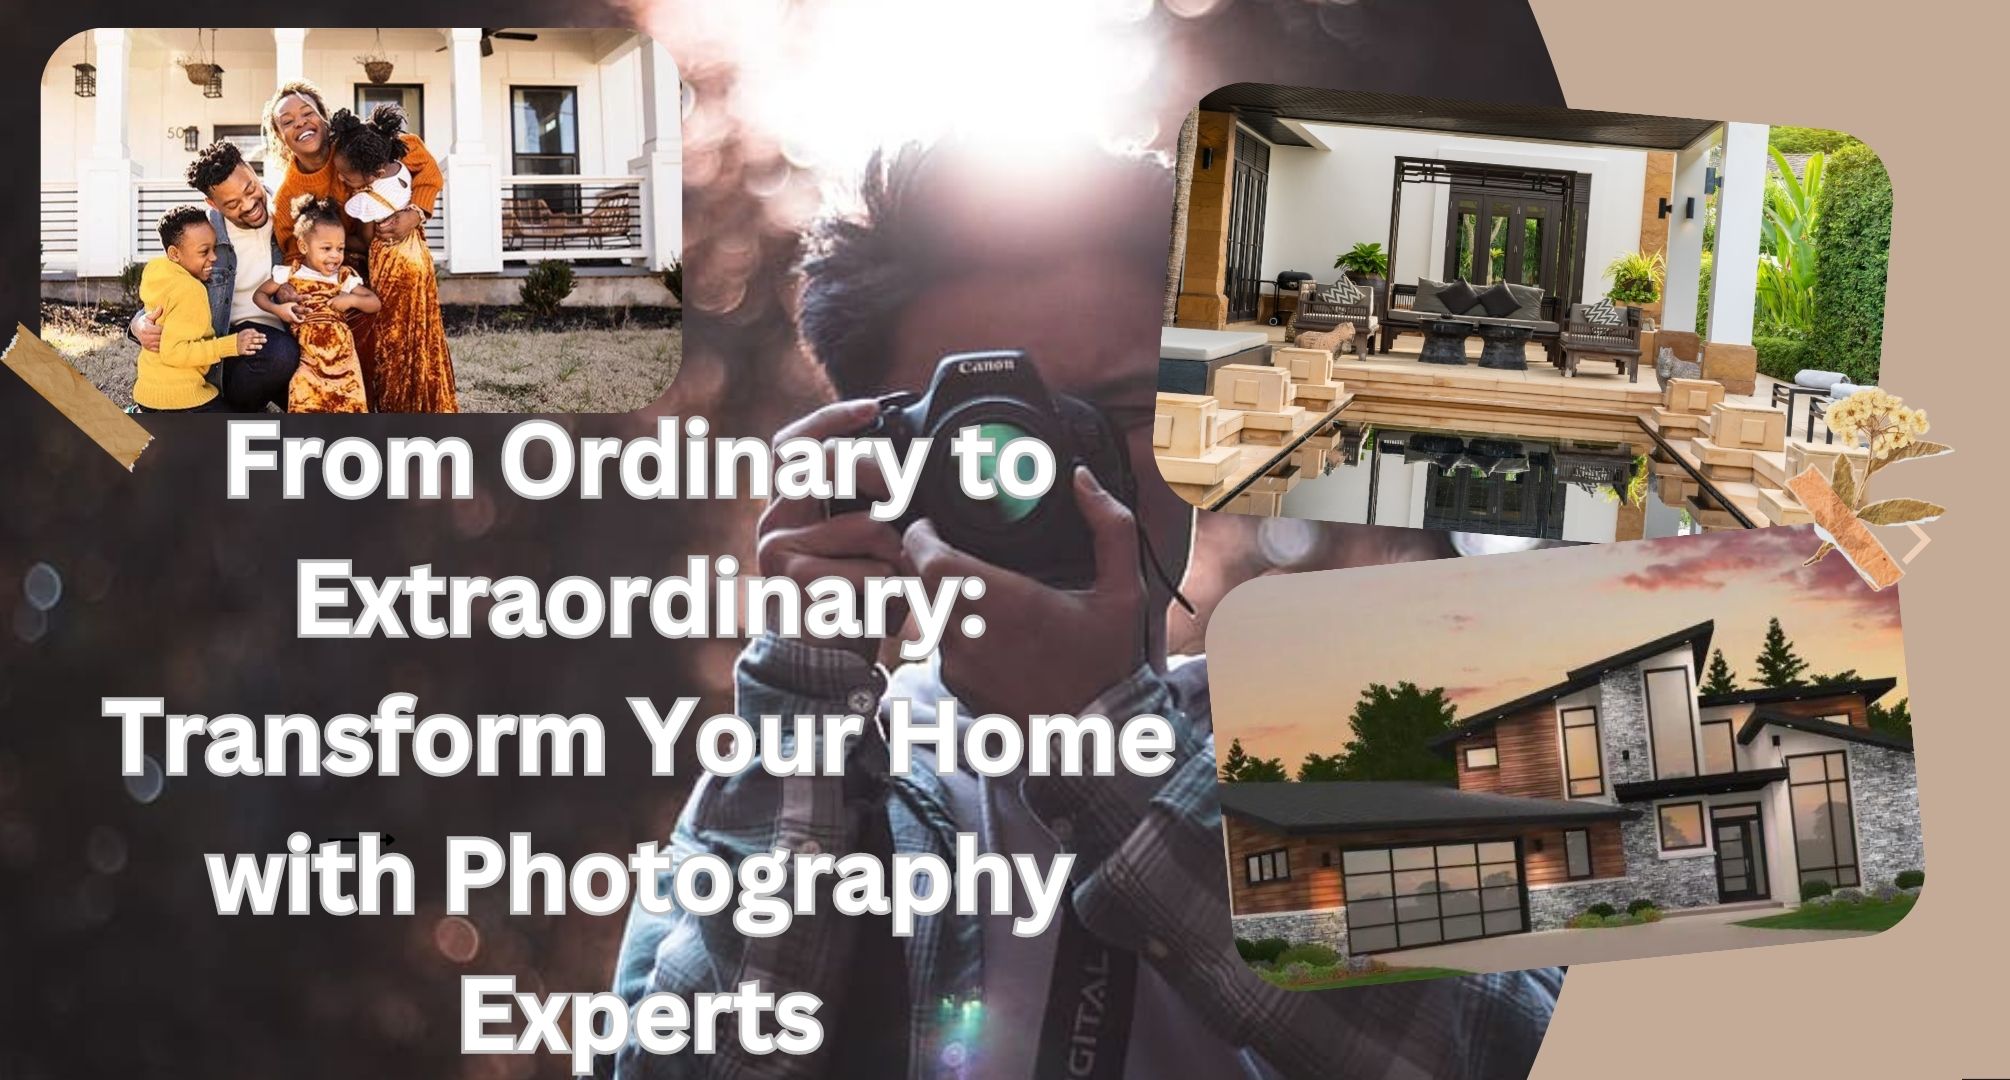 From Ordinary to Extraordinary Transform Your Home with Photography Experts